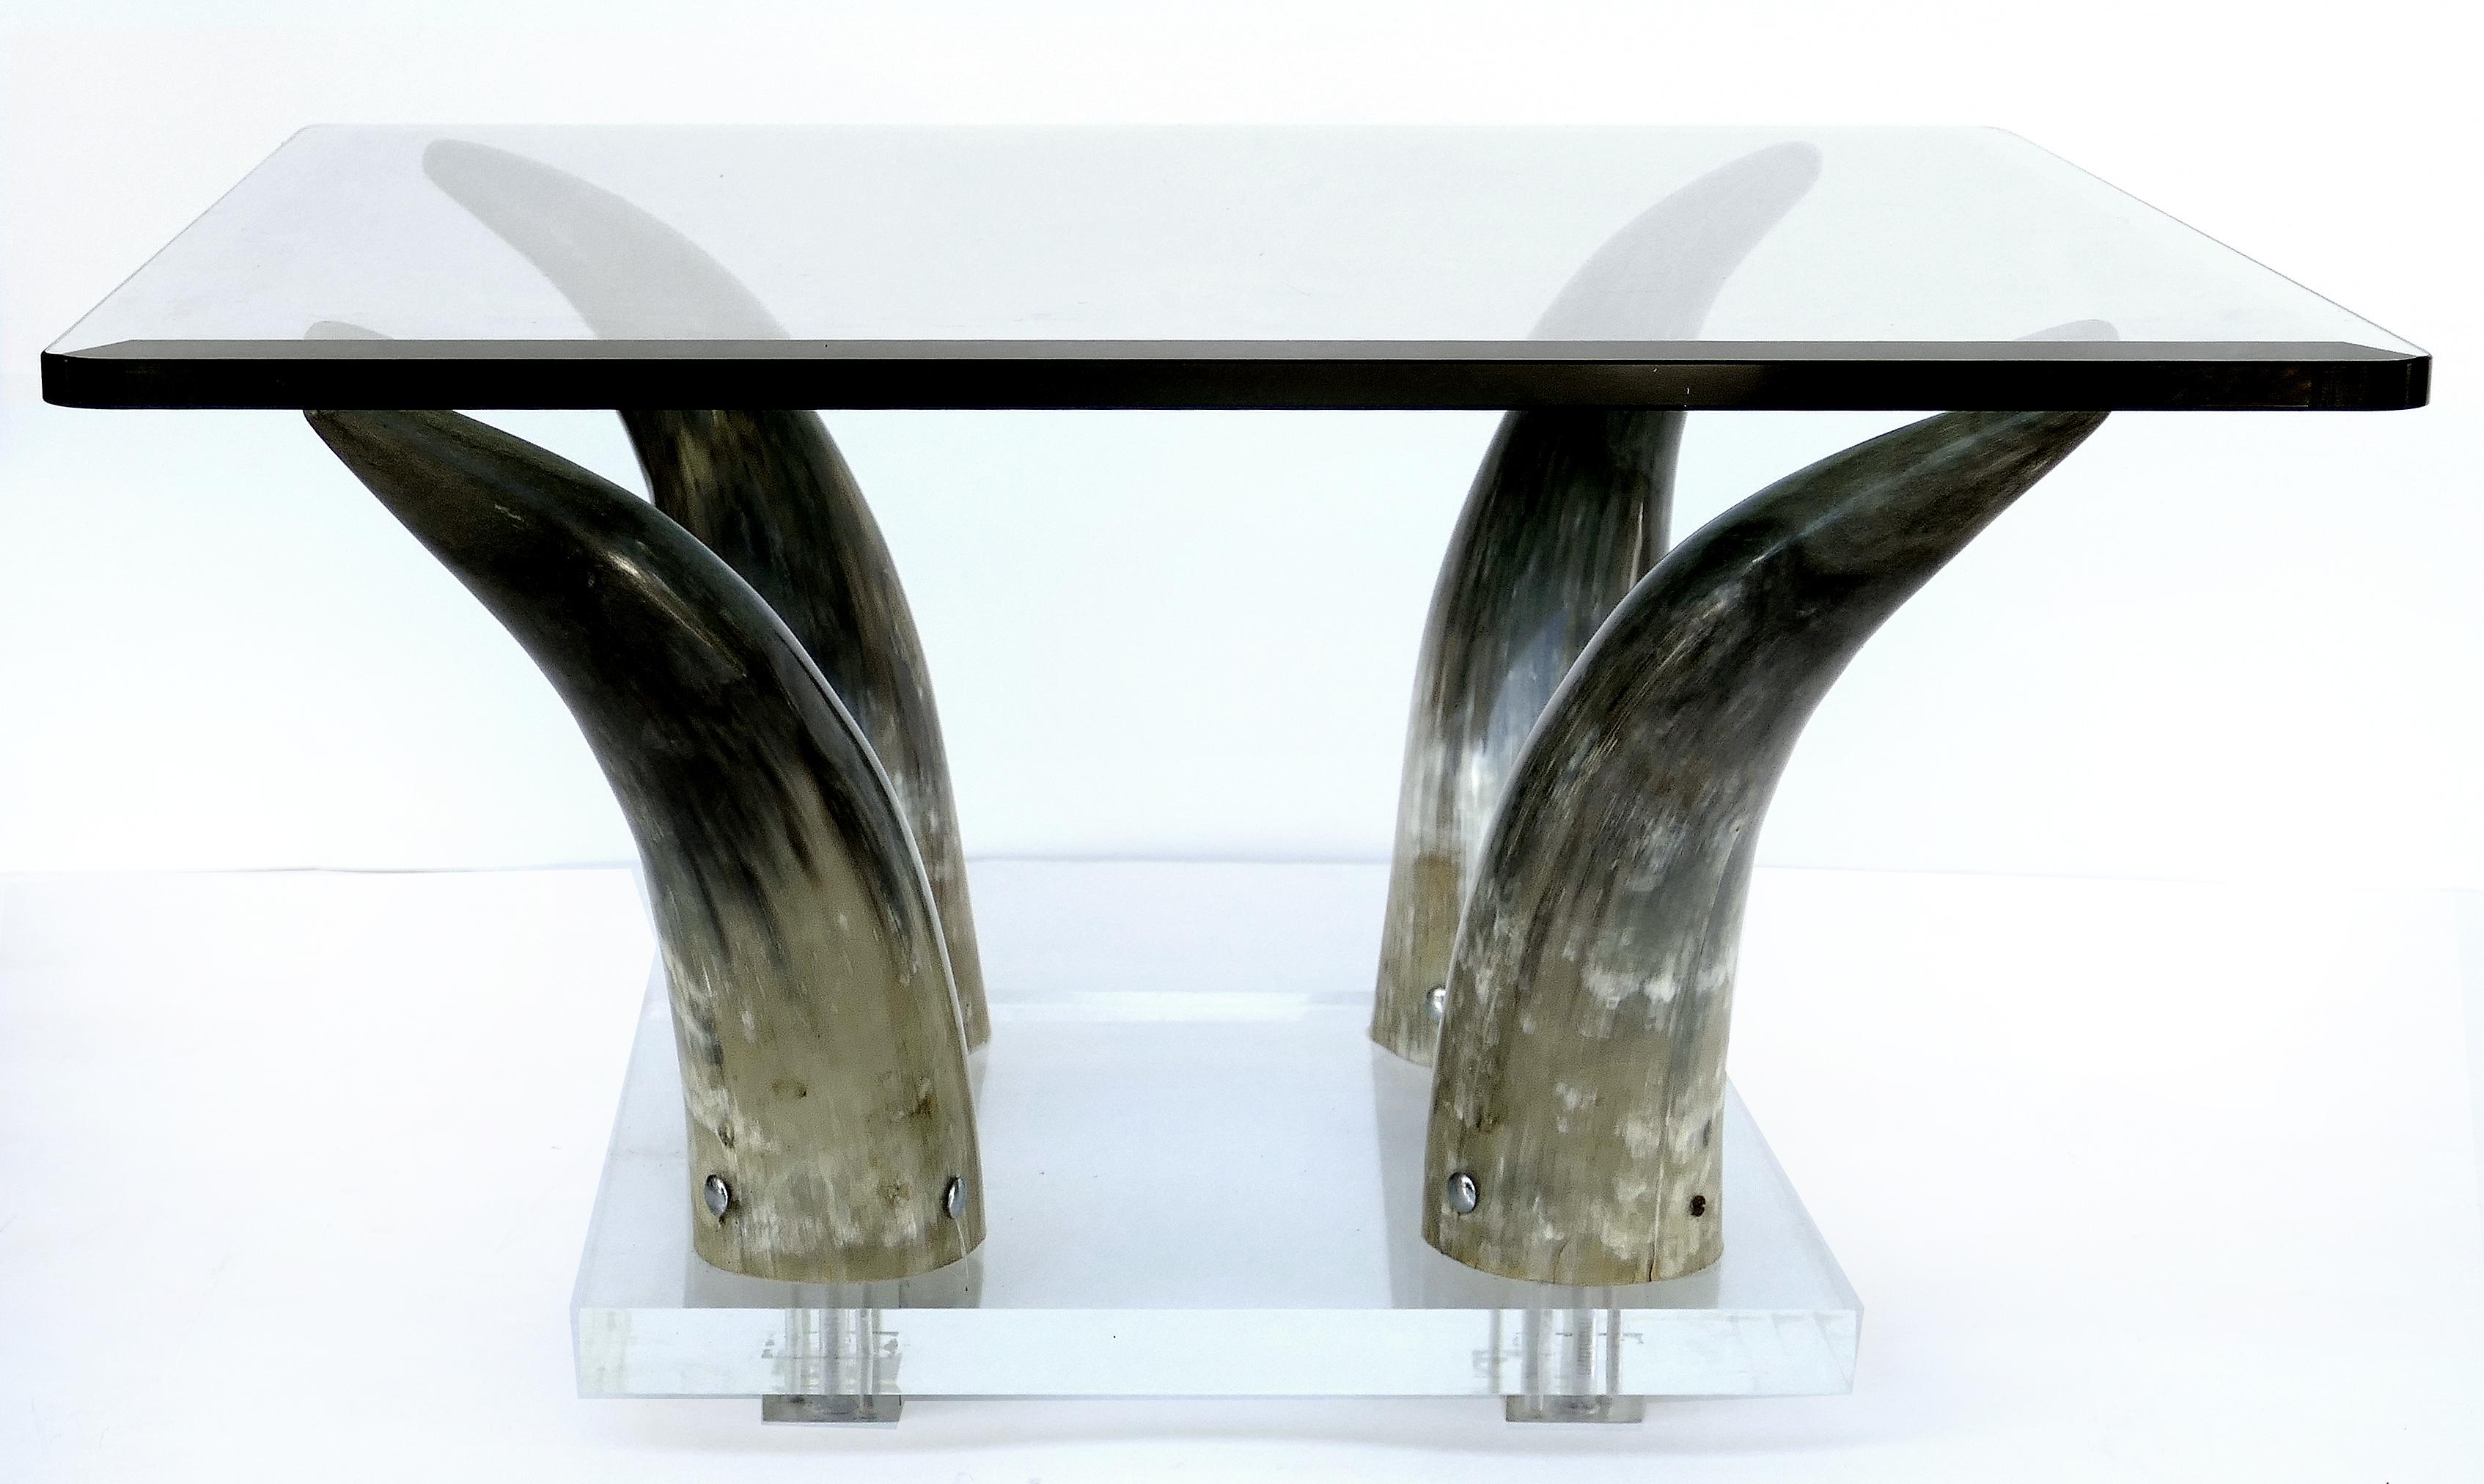 Horn and Lucite coffee table or low side table with glass top

Offered for sale is a modern polish steer horn and Lucite coffee table or low side table. Four horns are raised on a Lucite base to support a beveled glass top.